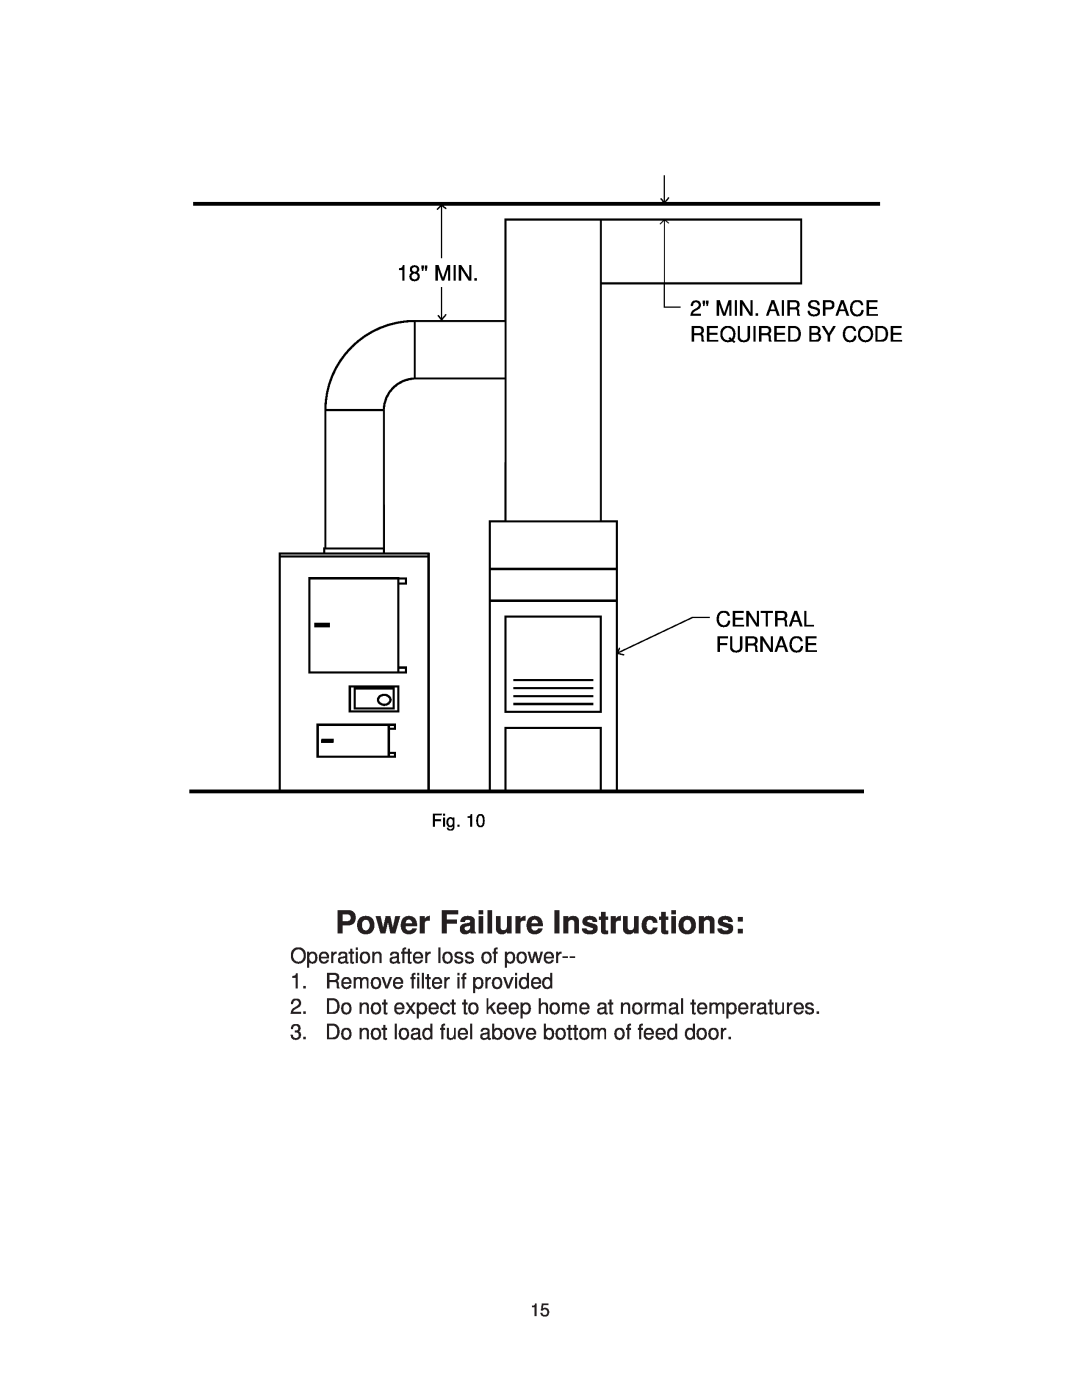 United States Stove 1321 warranty Power Failure Instructions, 18 MIN, 2 MIN. AIR SPACE, Required By Code, Central Furnace 